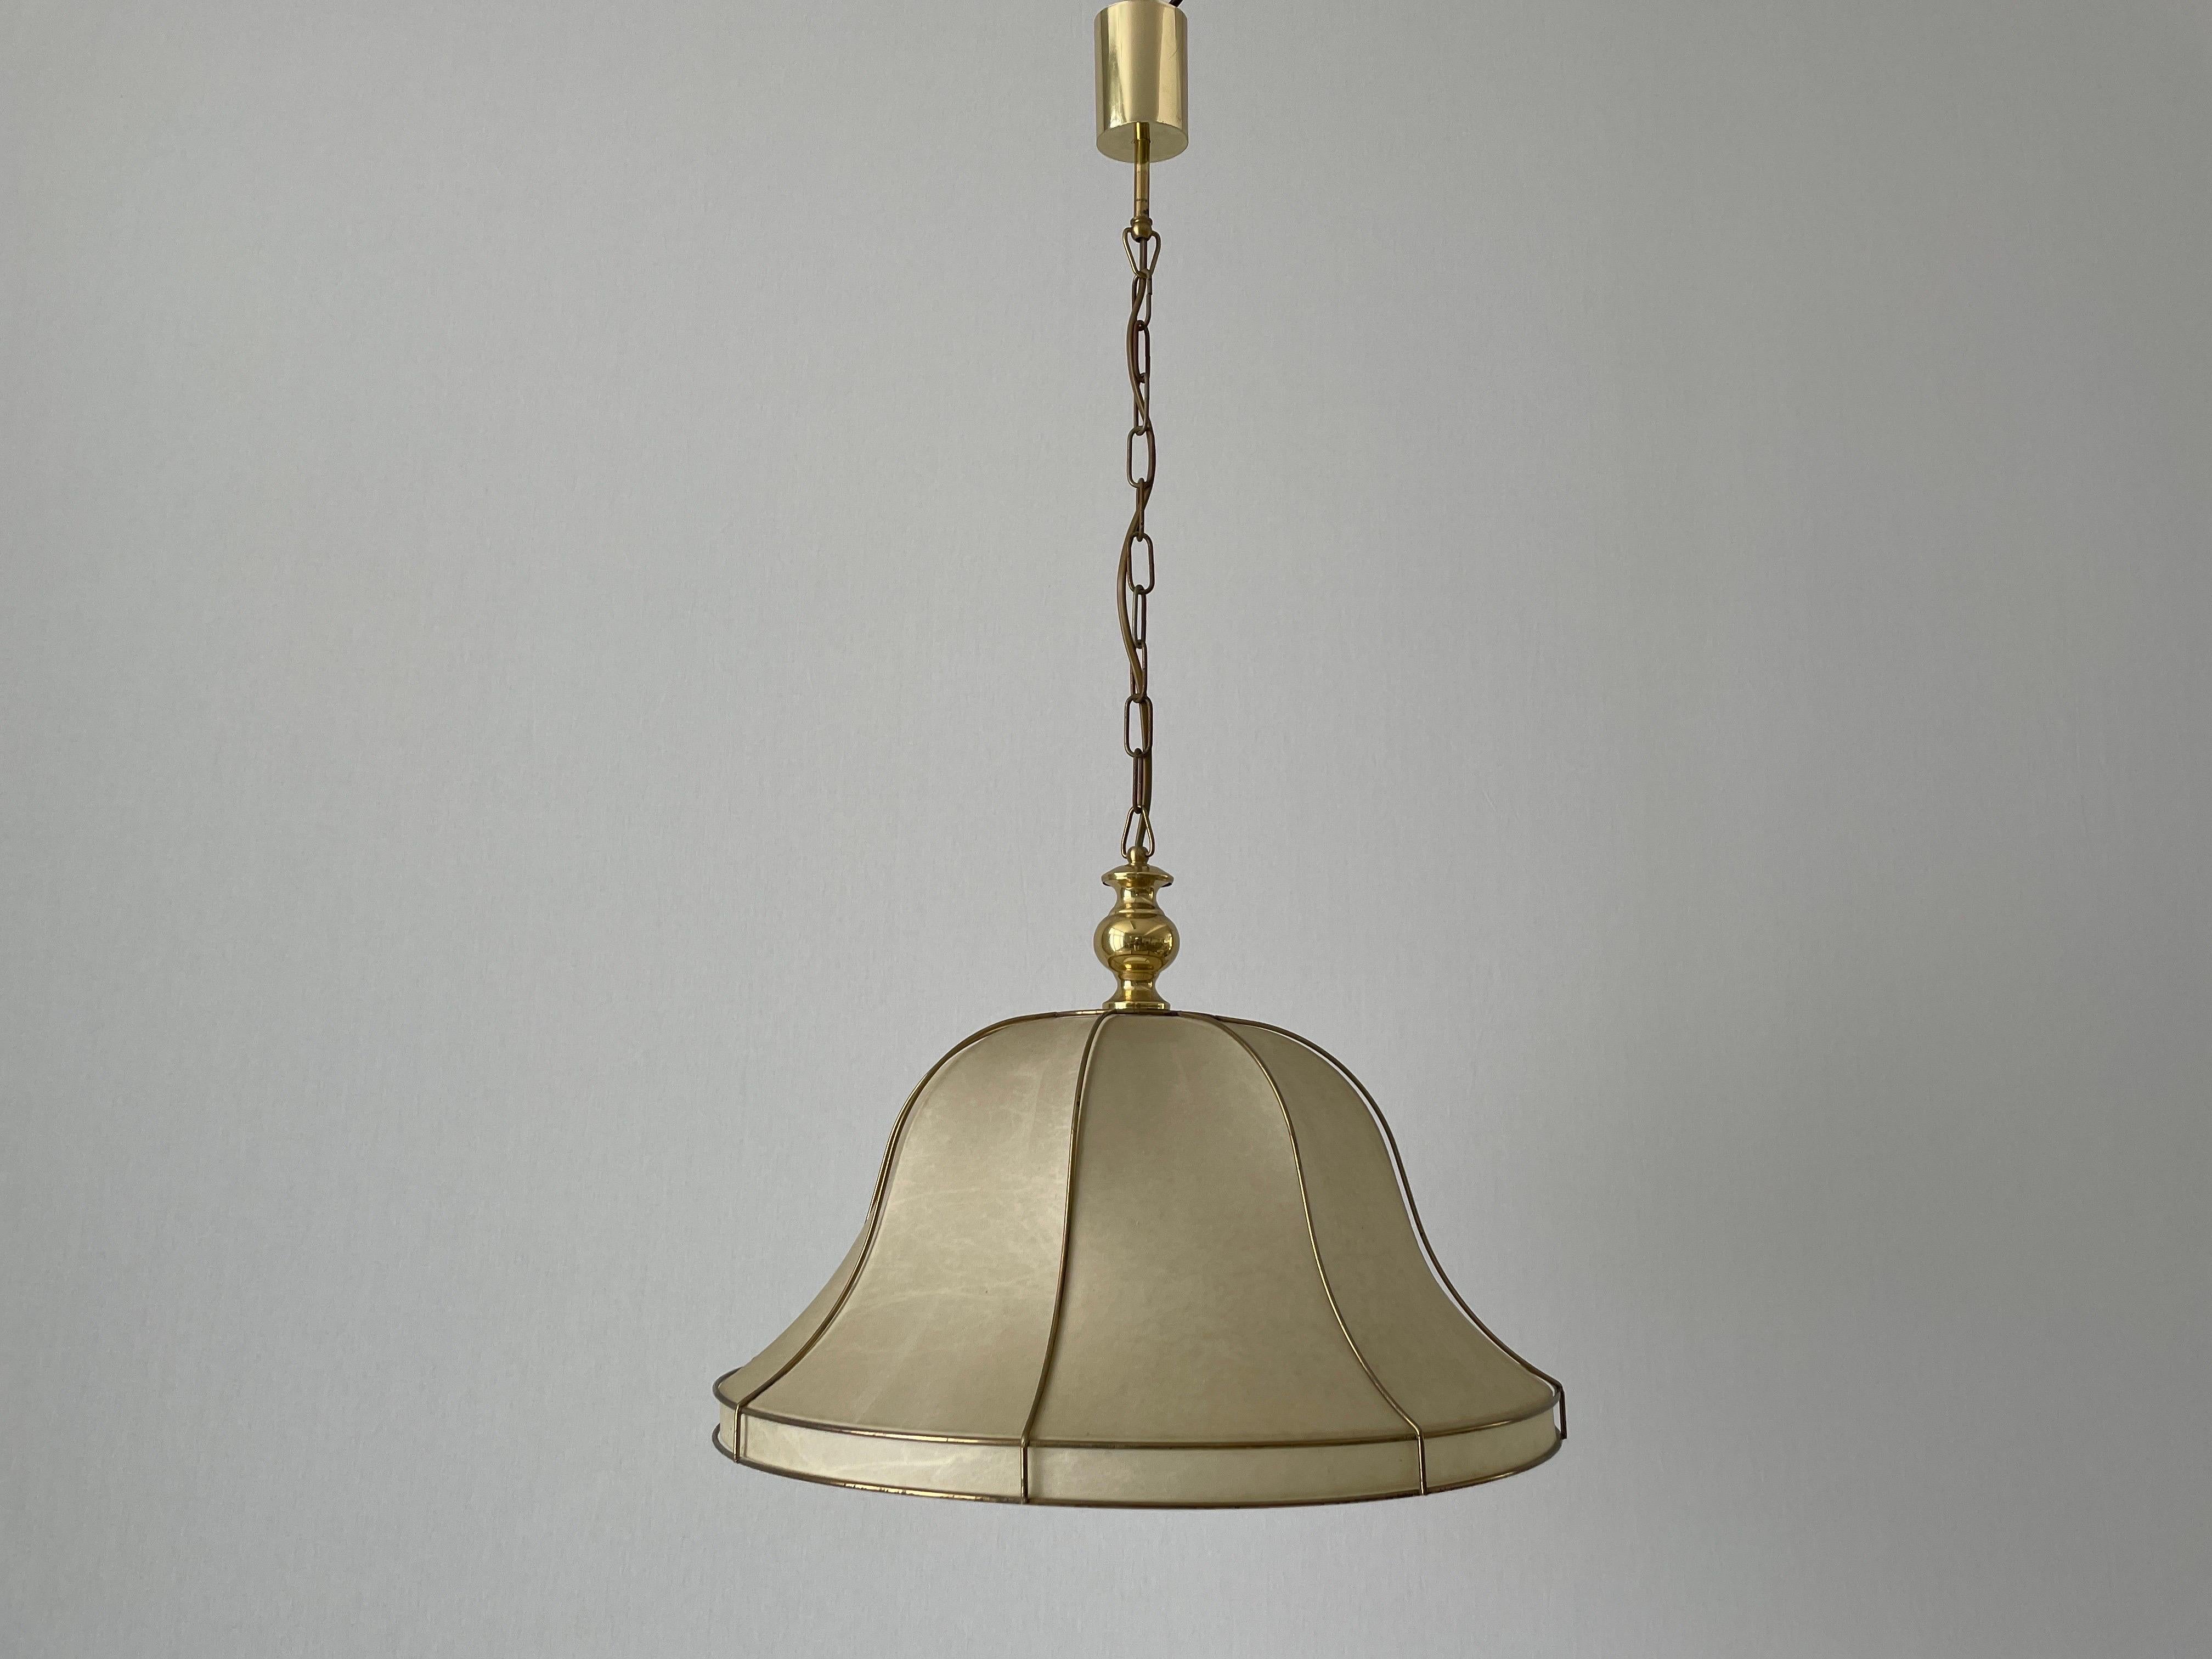 Mid-20th Century Cocoon Pendant Lamp with Gold Metal Shade Frame by Goldkant, 1960s, Germany For Sale